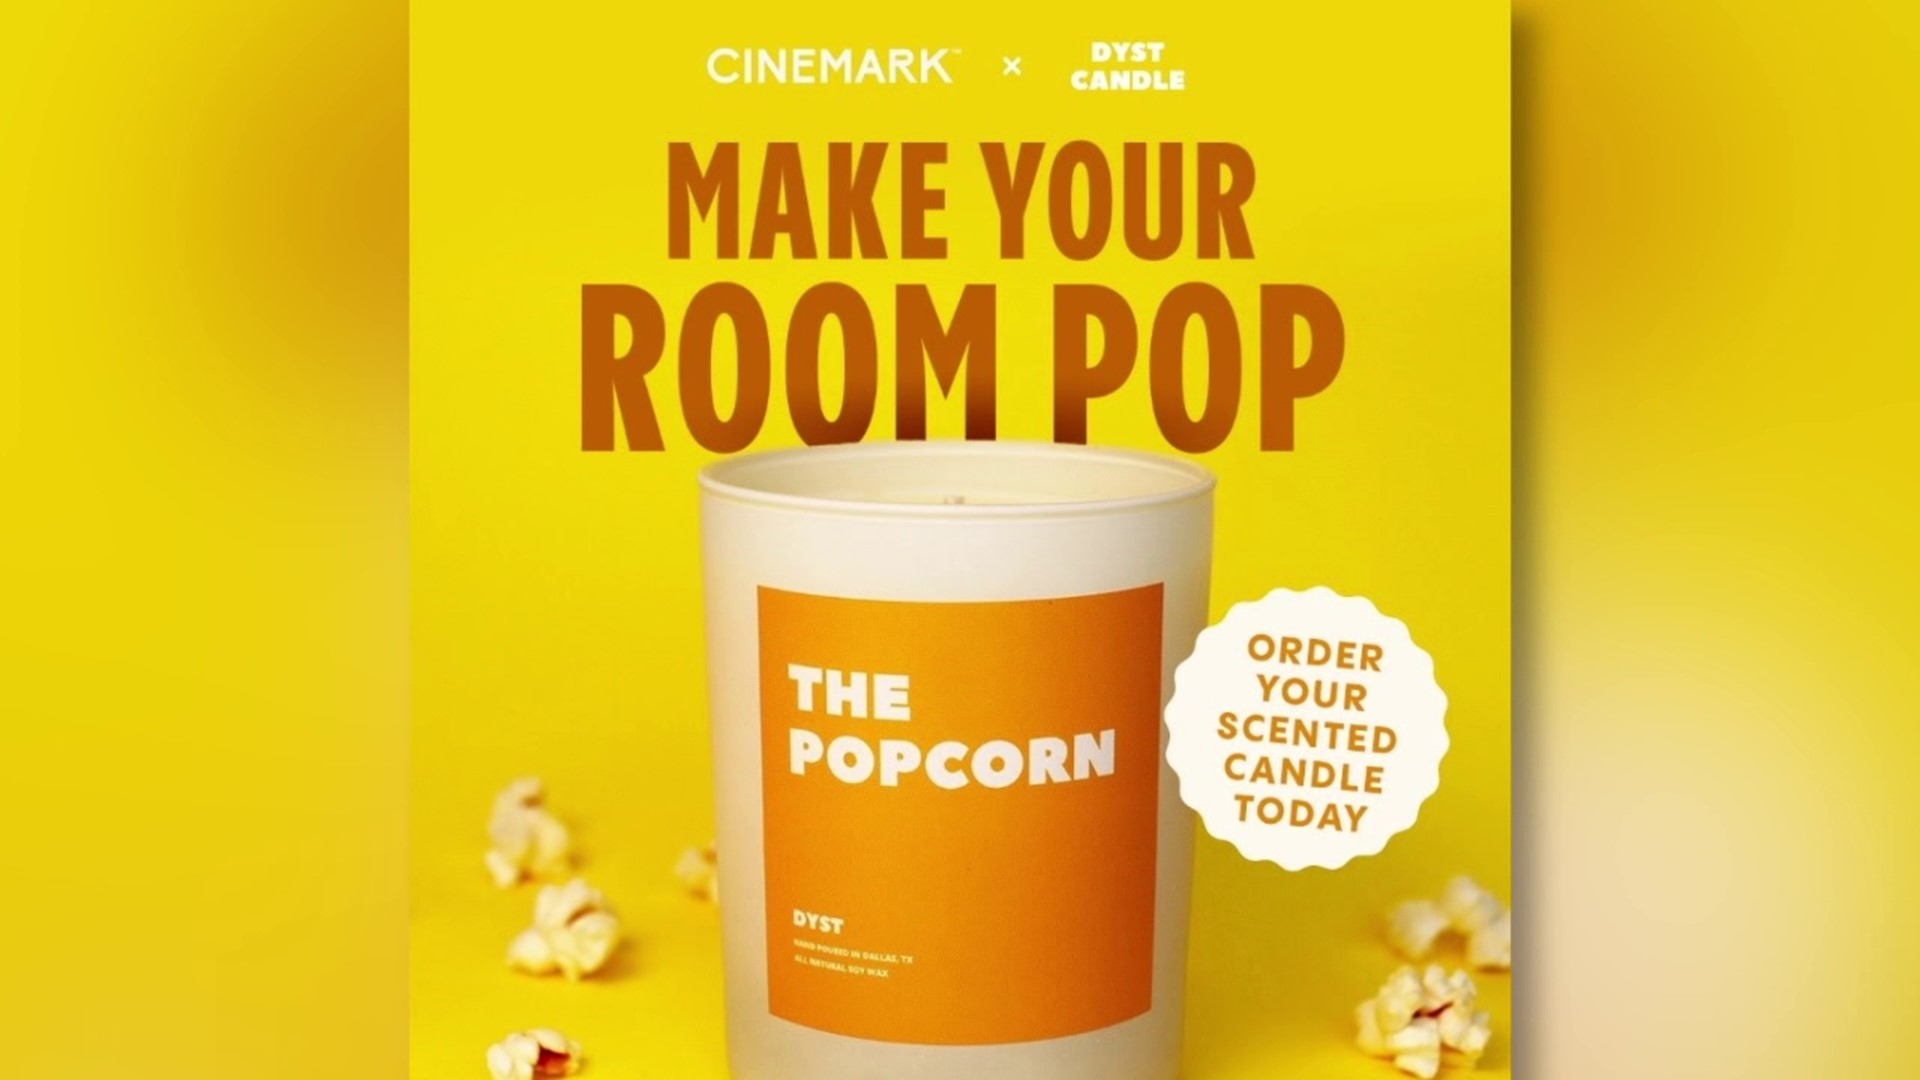 The movie theatre is collaborating with a candle company that will give popcorn lovers a movie theatre smell in their homes.